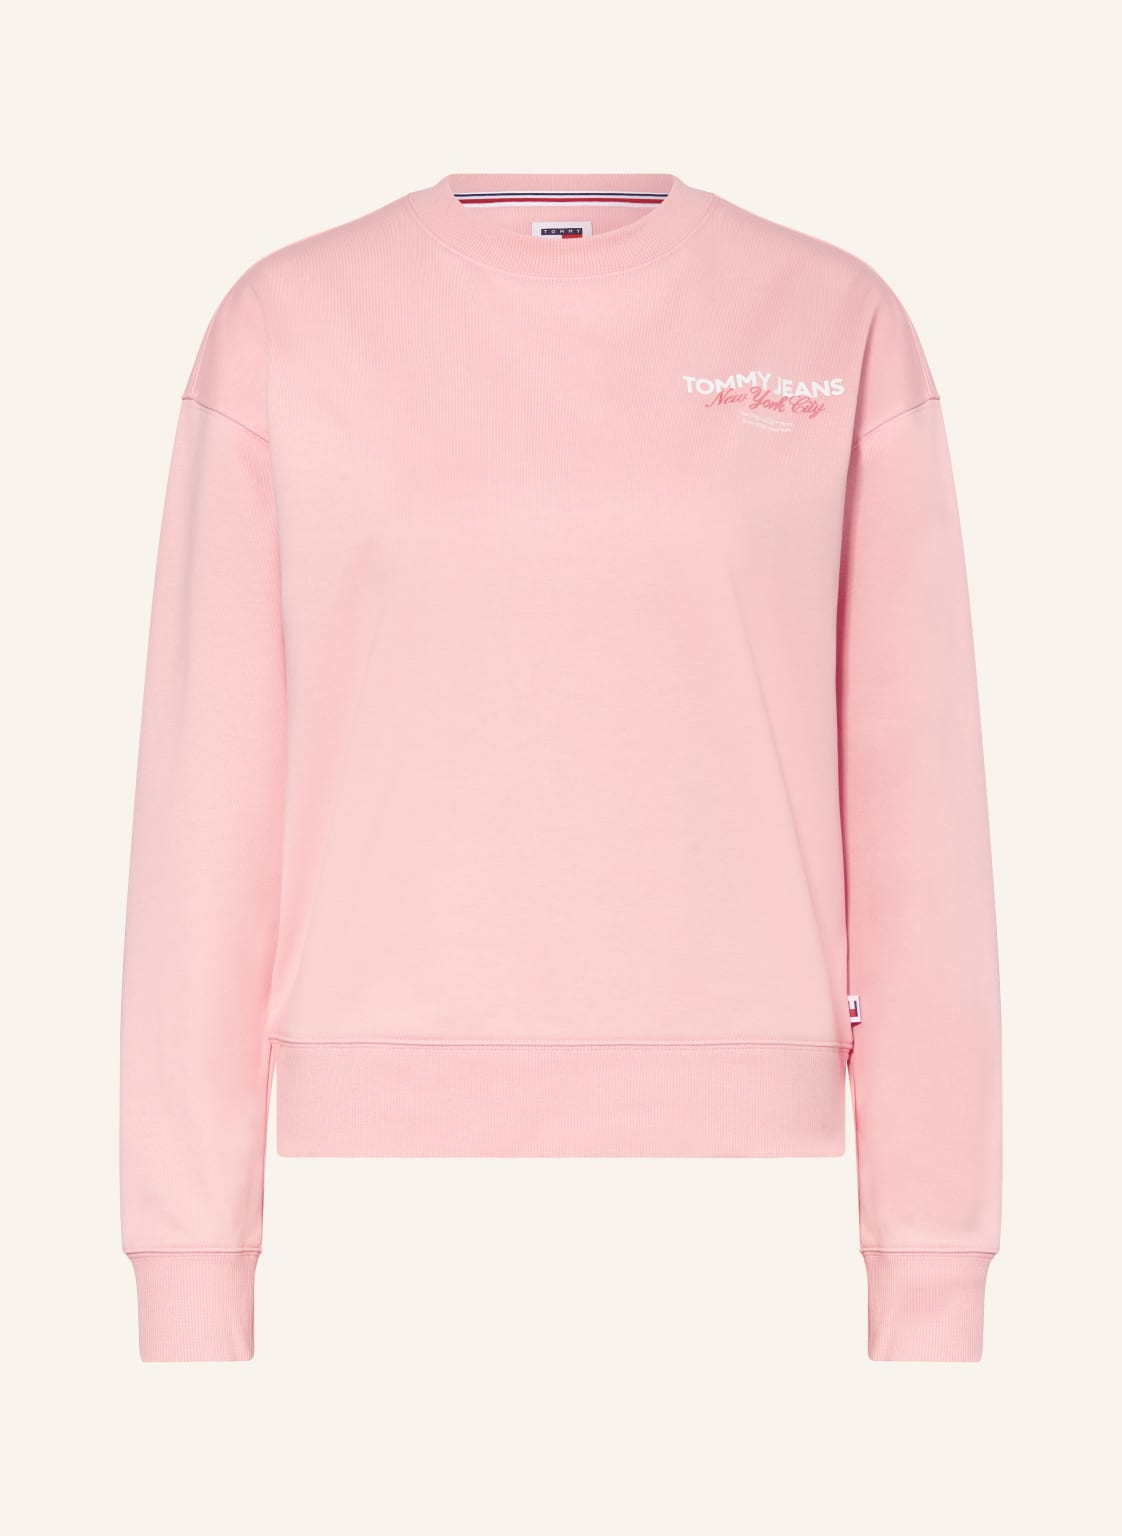 Tommy Jeans Sweatshirt rosa von Tommy Jeans